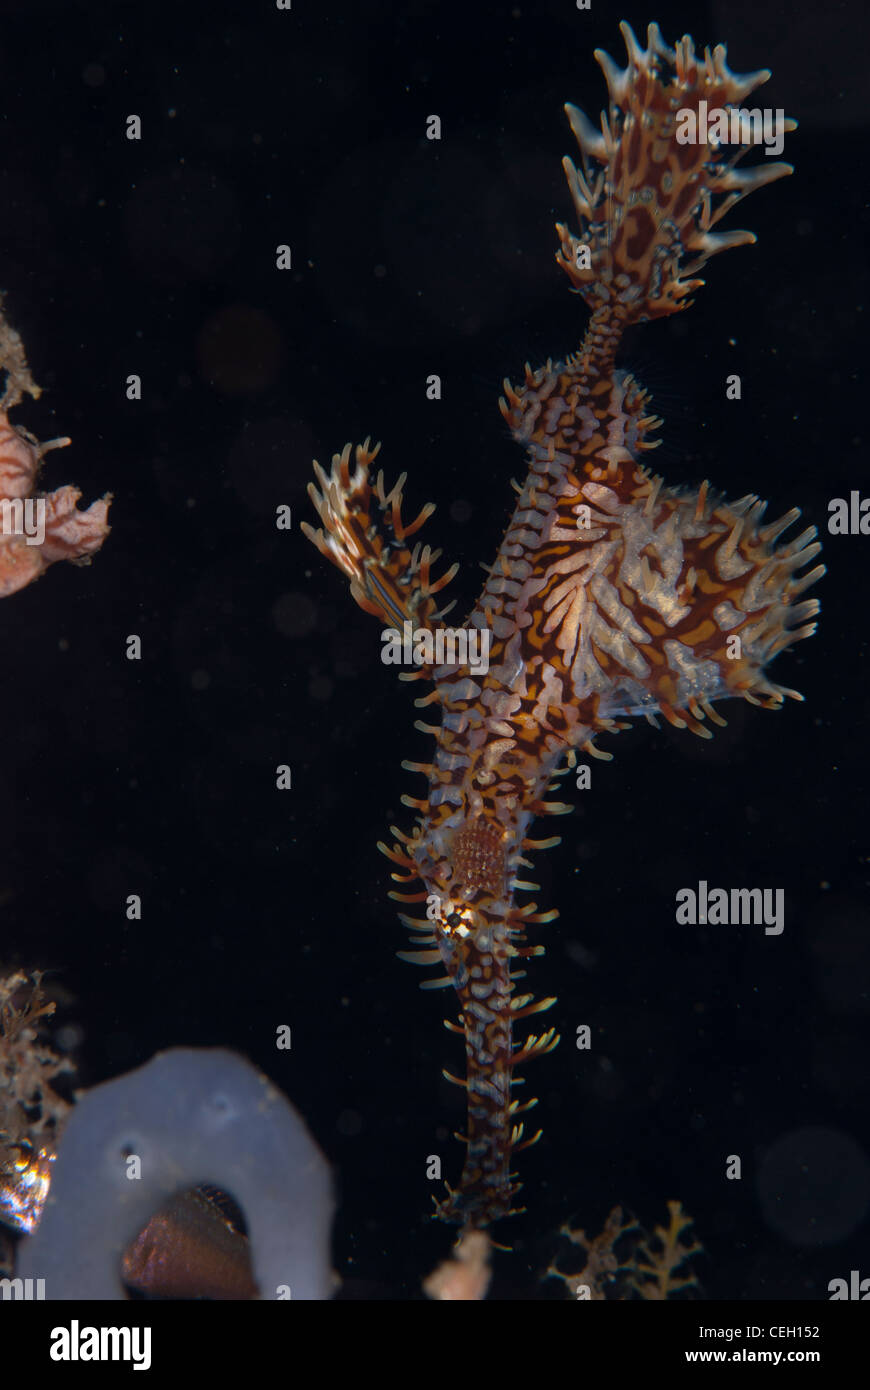 An ornate or Harlequin ghost pipefish taken in the coral reef of Indonesia. Bunaken Marine Park, North Sulawesi Stock Photo